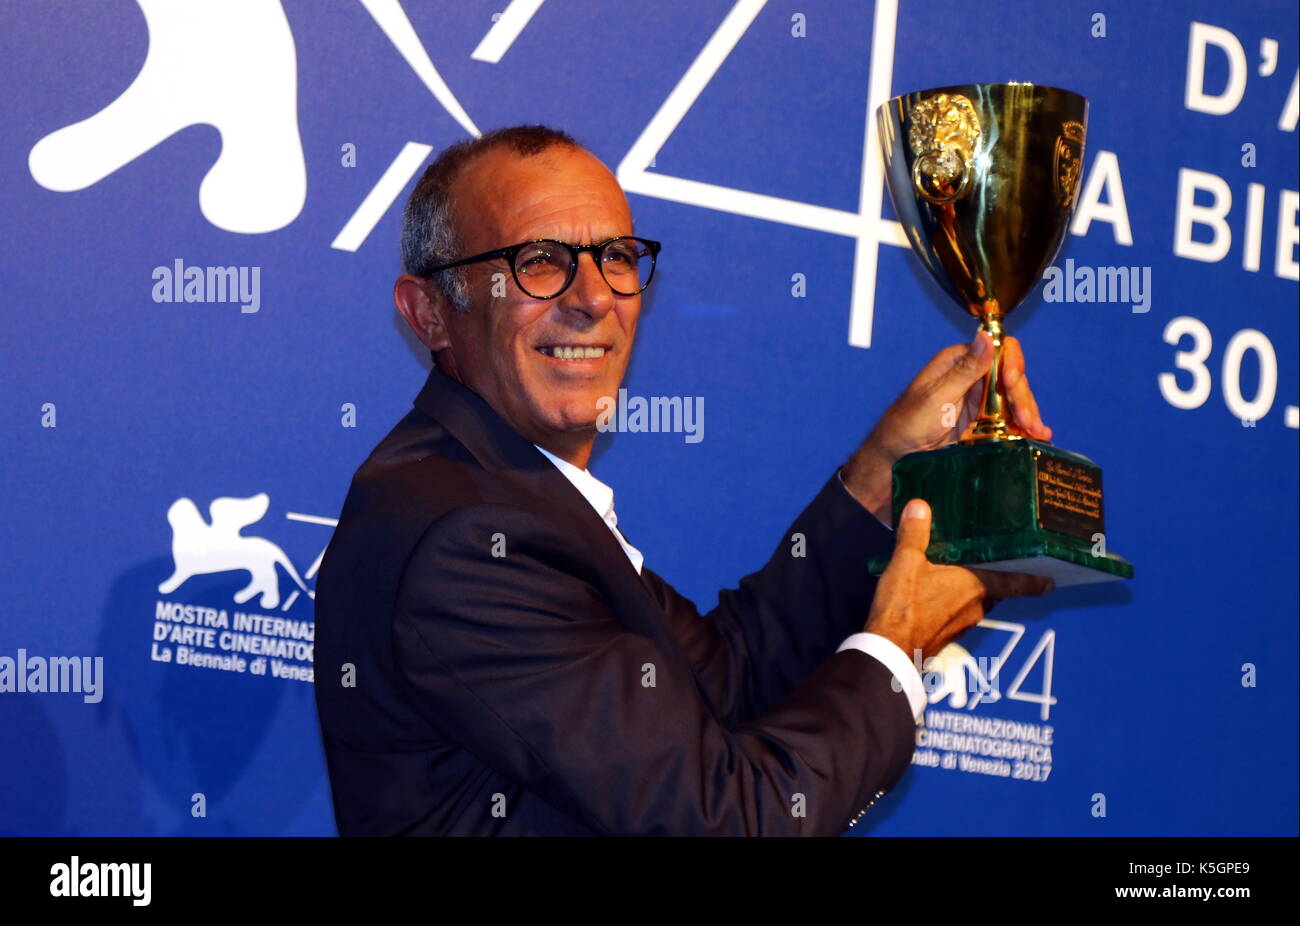 Venice, Italy. 9th September, 2017. Actor Kamel El Basha poses during a photocall after he receives the Coppa Volpi for Best Actor for his character in the movie 'The Insult' at the Award Photocall during the 74th Venice International Film Festival at Lido of Venice on 9th September, 2017. Credit: Andrea Spinelli/Alamy Live News Stock Photo